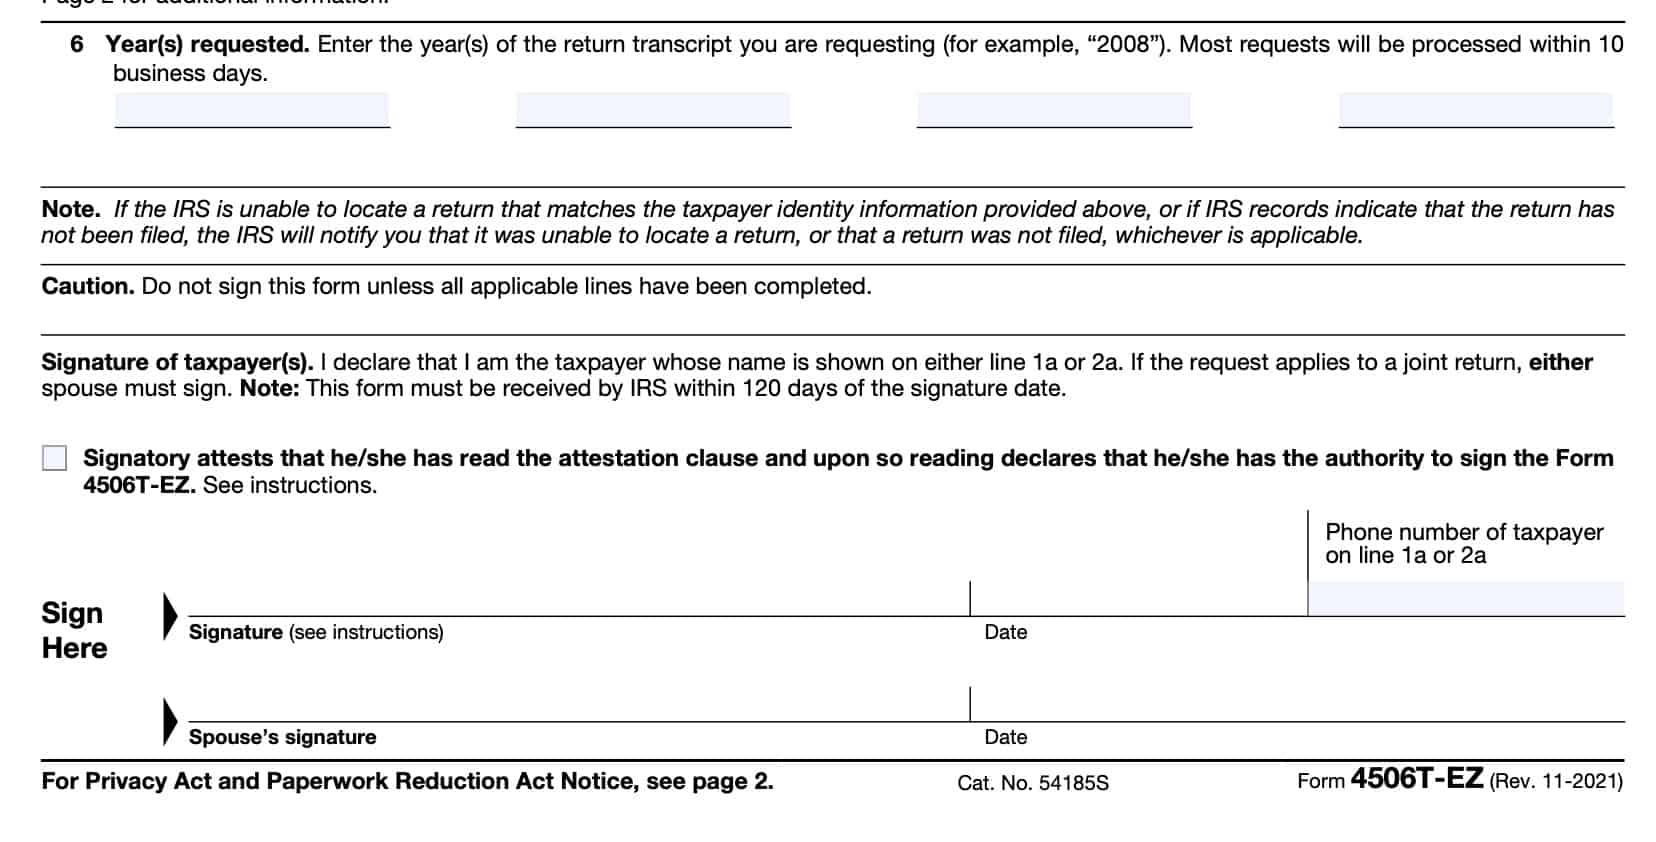 irs form 4506-t-ez, continued